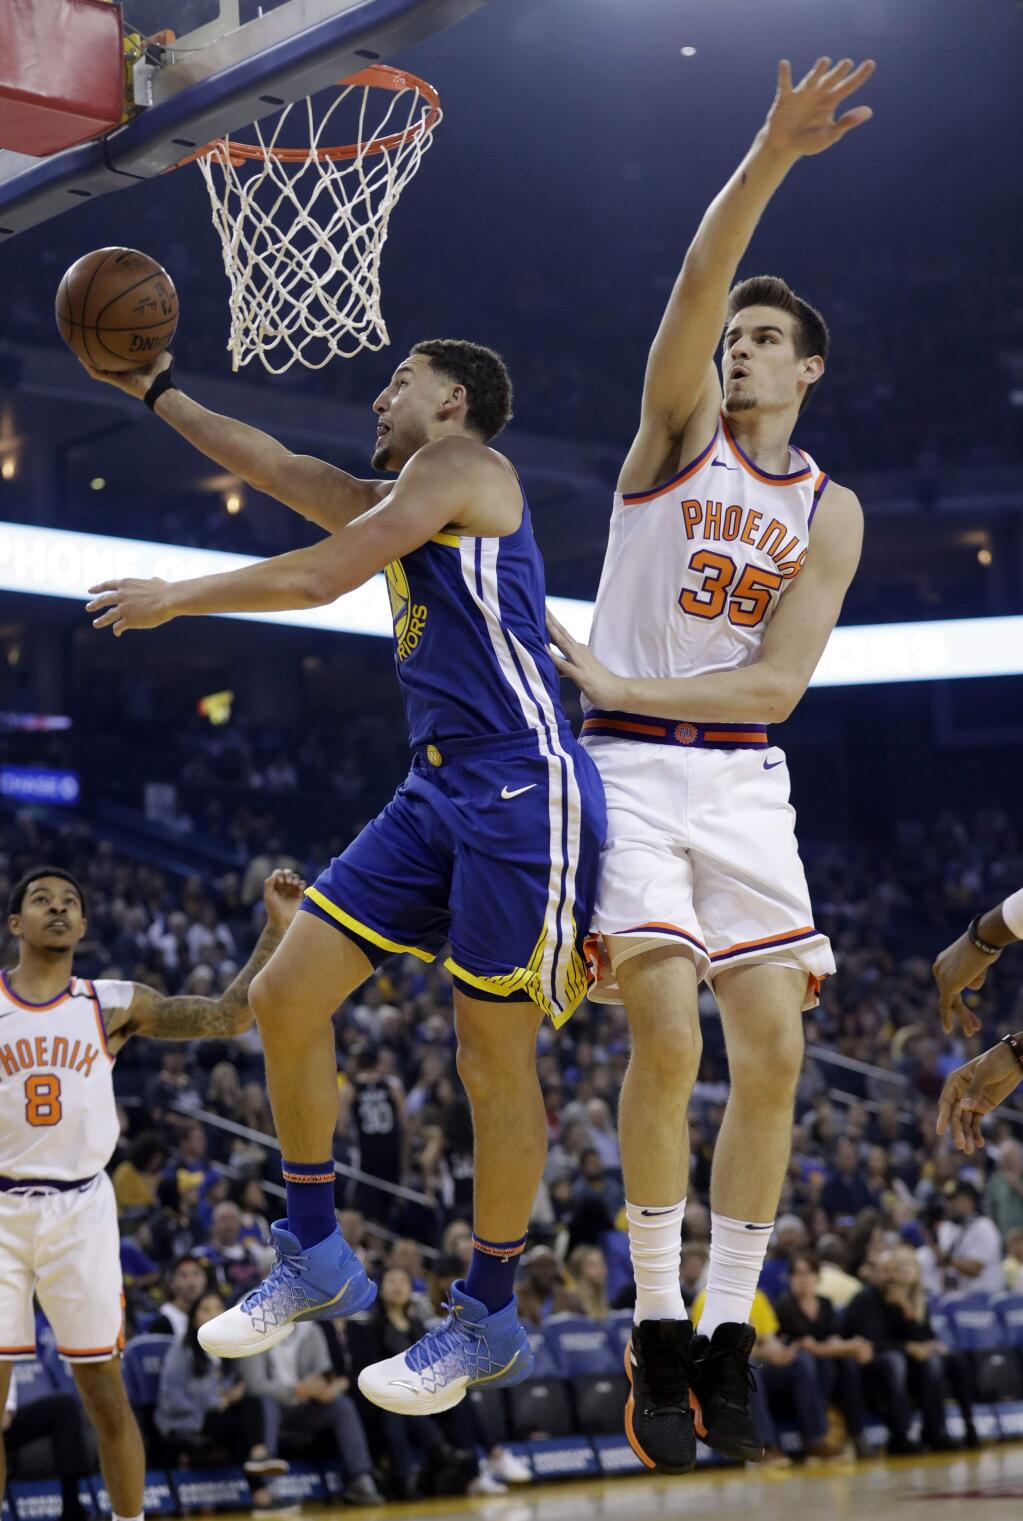 Golden State Warriors' Klay Thompson, left, drives past Phoenix Suns' Dragan Bender (35) during the first half of an NBA basketball game Sunday, April 1, 2018, in Oakland, Calif. (AP Photo/Marcio Jose Sanchez)